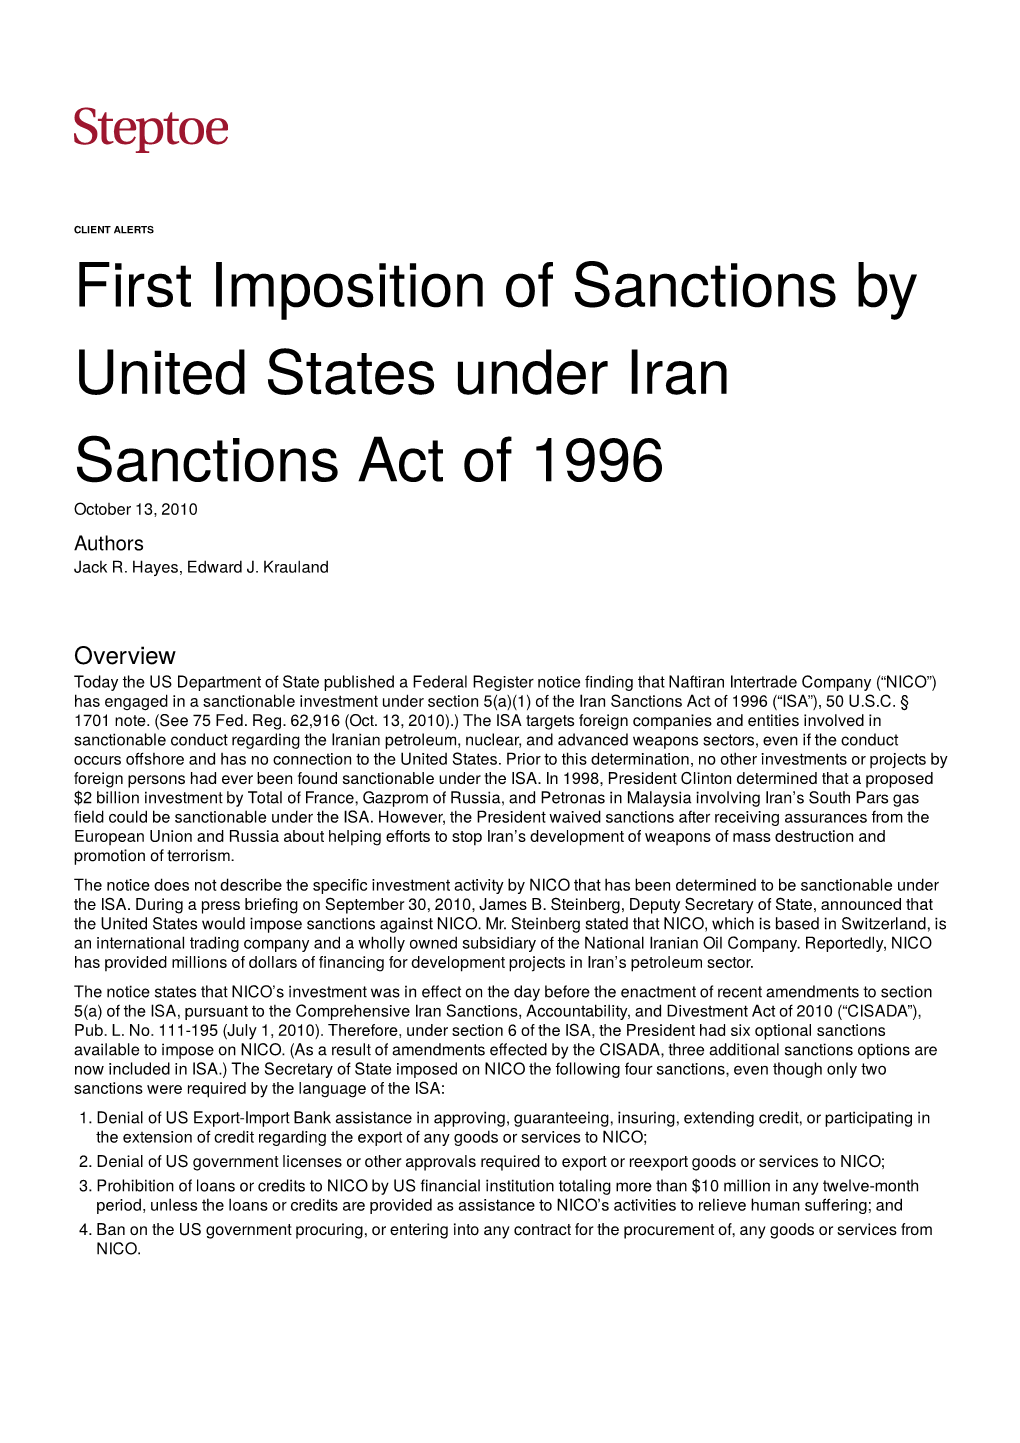 First Imposition of Sanctions by United States Under Iran Sanctions Act of 1996